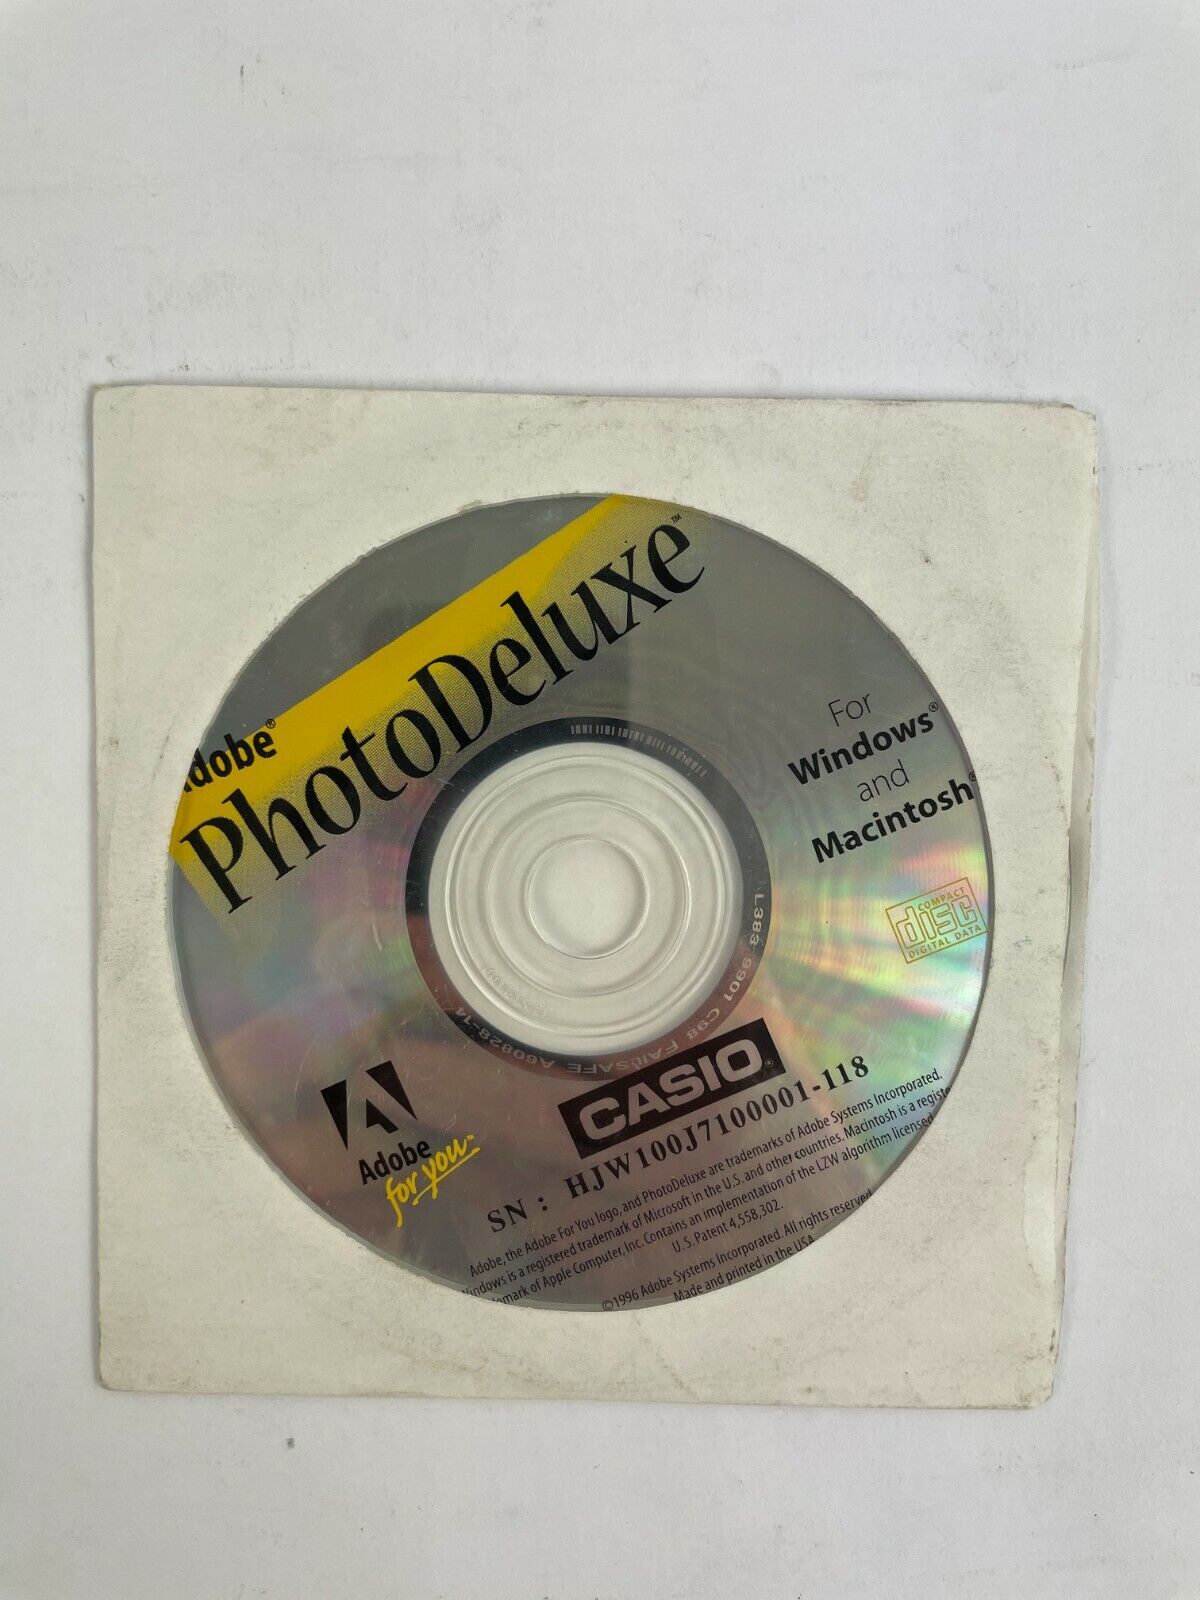 Adobe Photo Deluxe Casio HJW100J7100001-118 For Windows and Macintosh